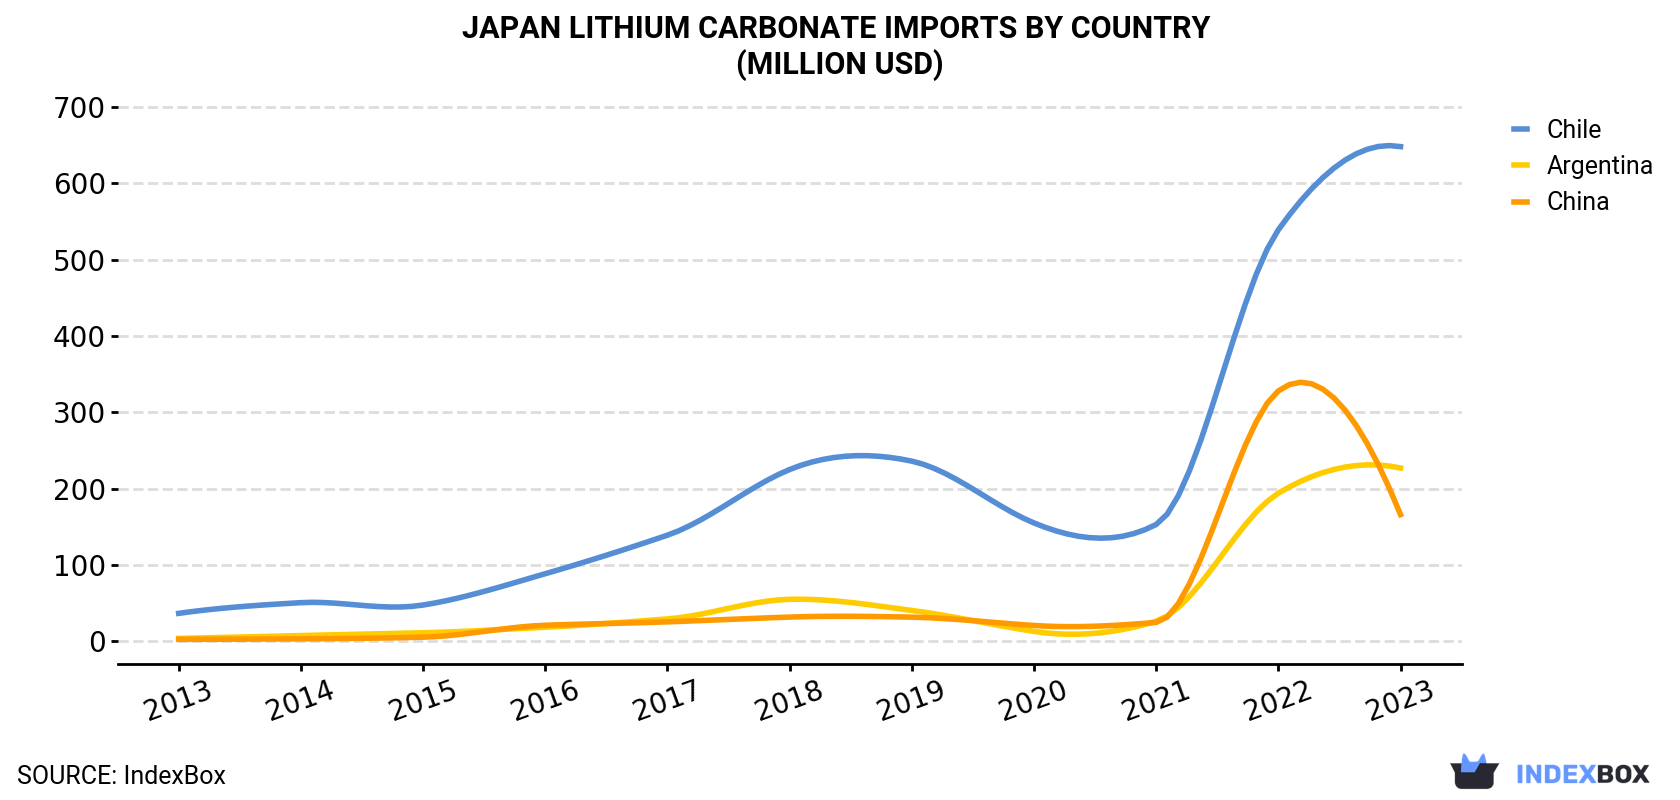 Japan Lithium Carbonate Imports By Country (Million USD)